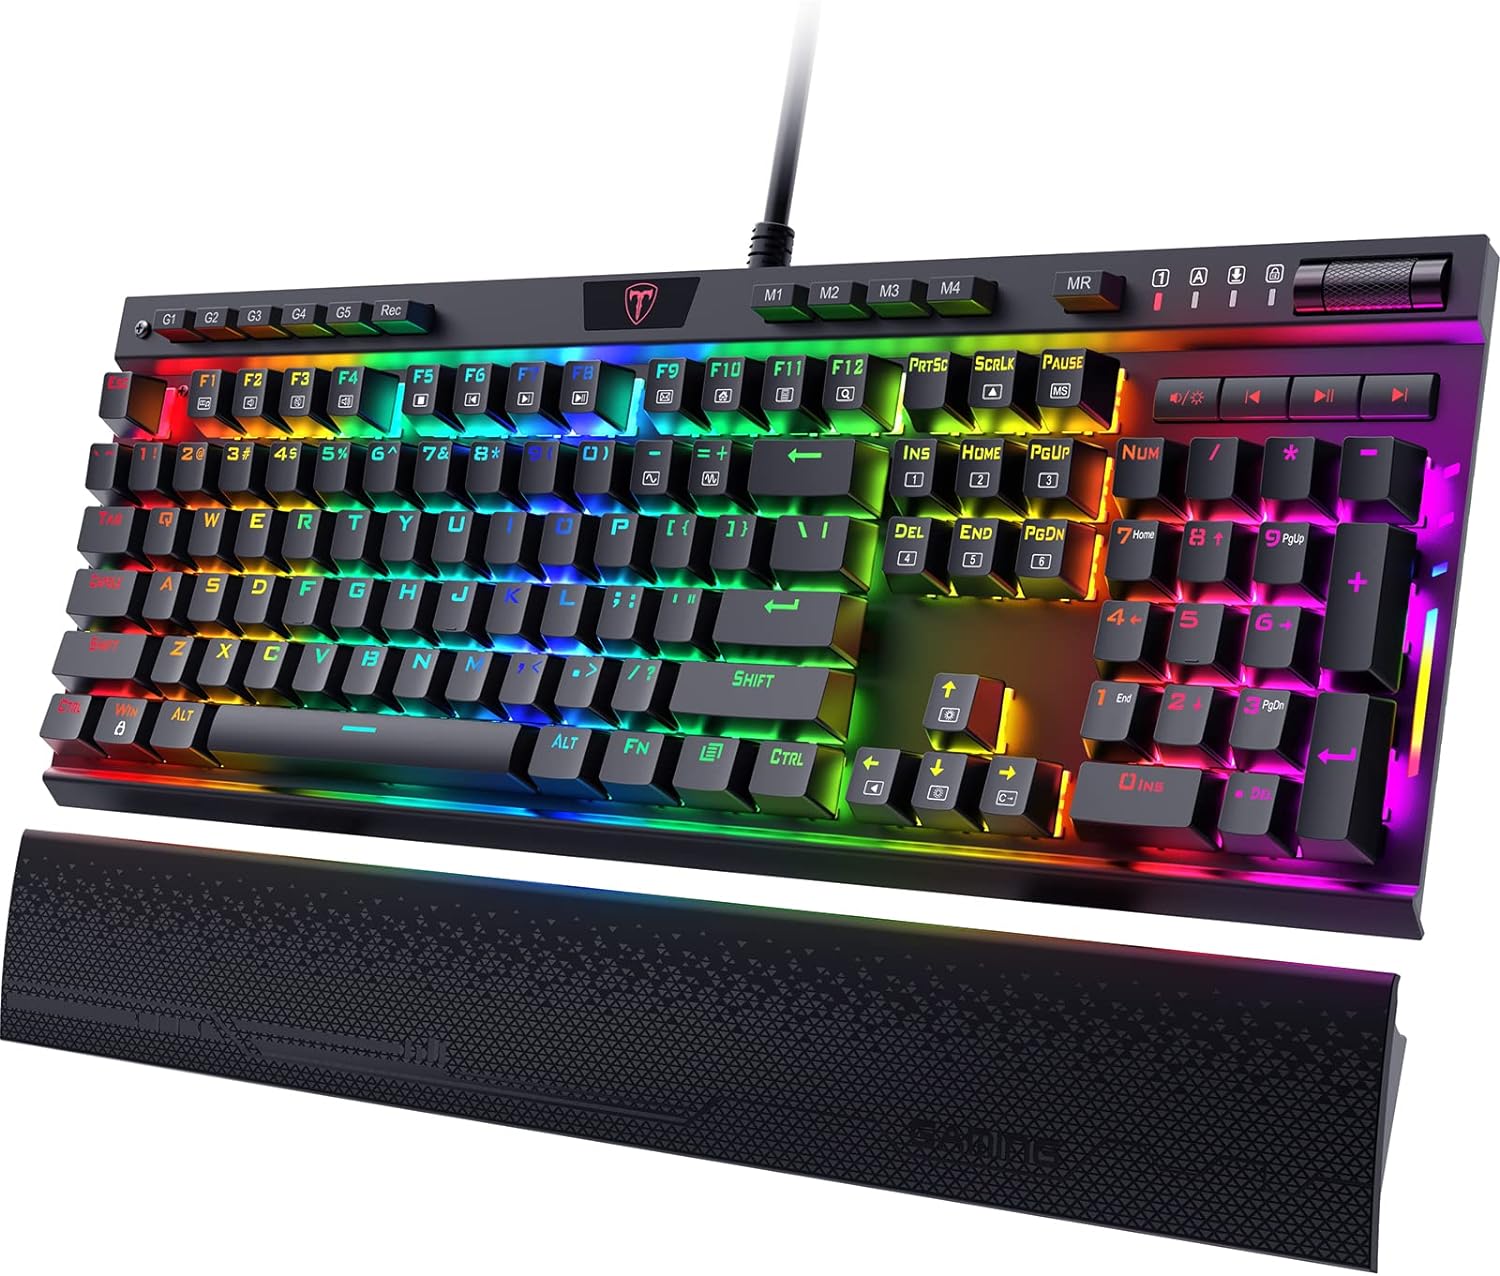 RisoPhy PRO RGB Mechanical Gaming Keyboard, Per-Key RGB Illumination, Macro Keys & Dedicated Media Controls, Detachable Wrist Rest, Aluminum Frame, Hot Swappable Linear Red Switches Wired Keyboard